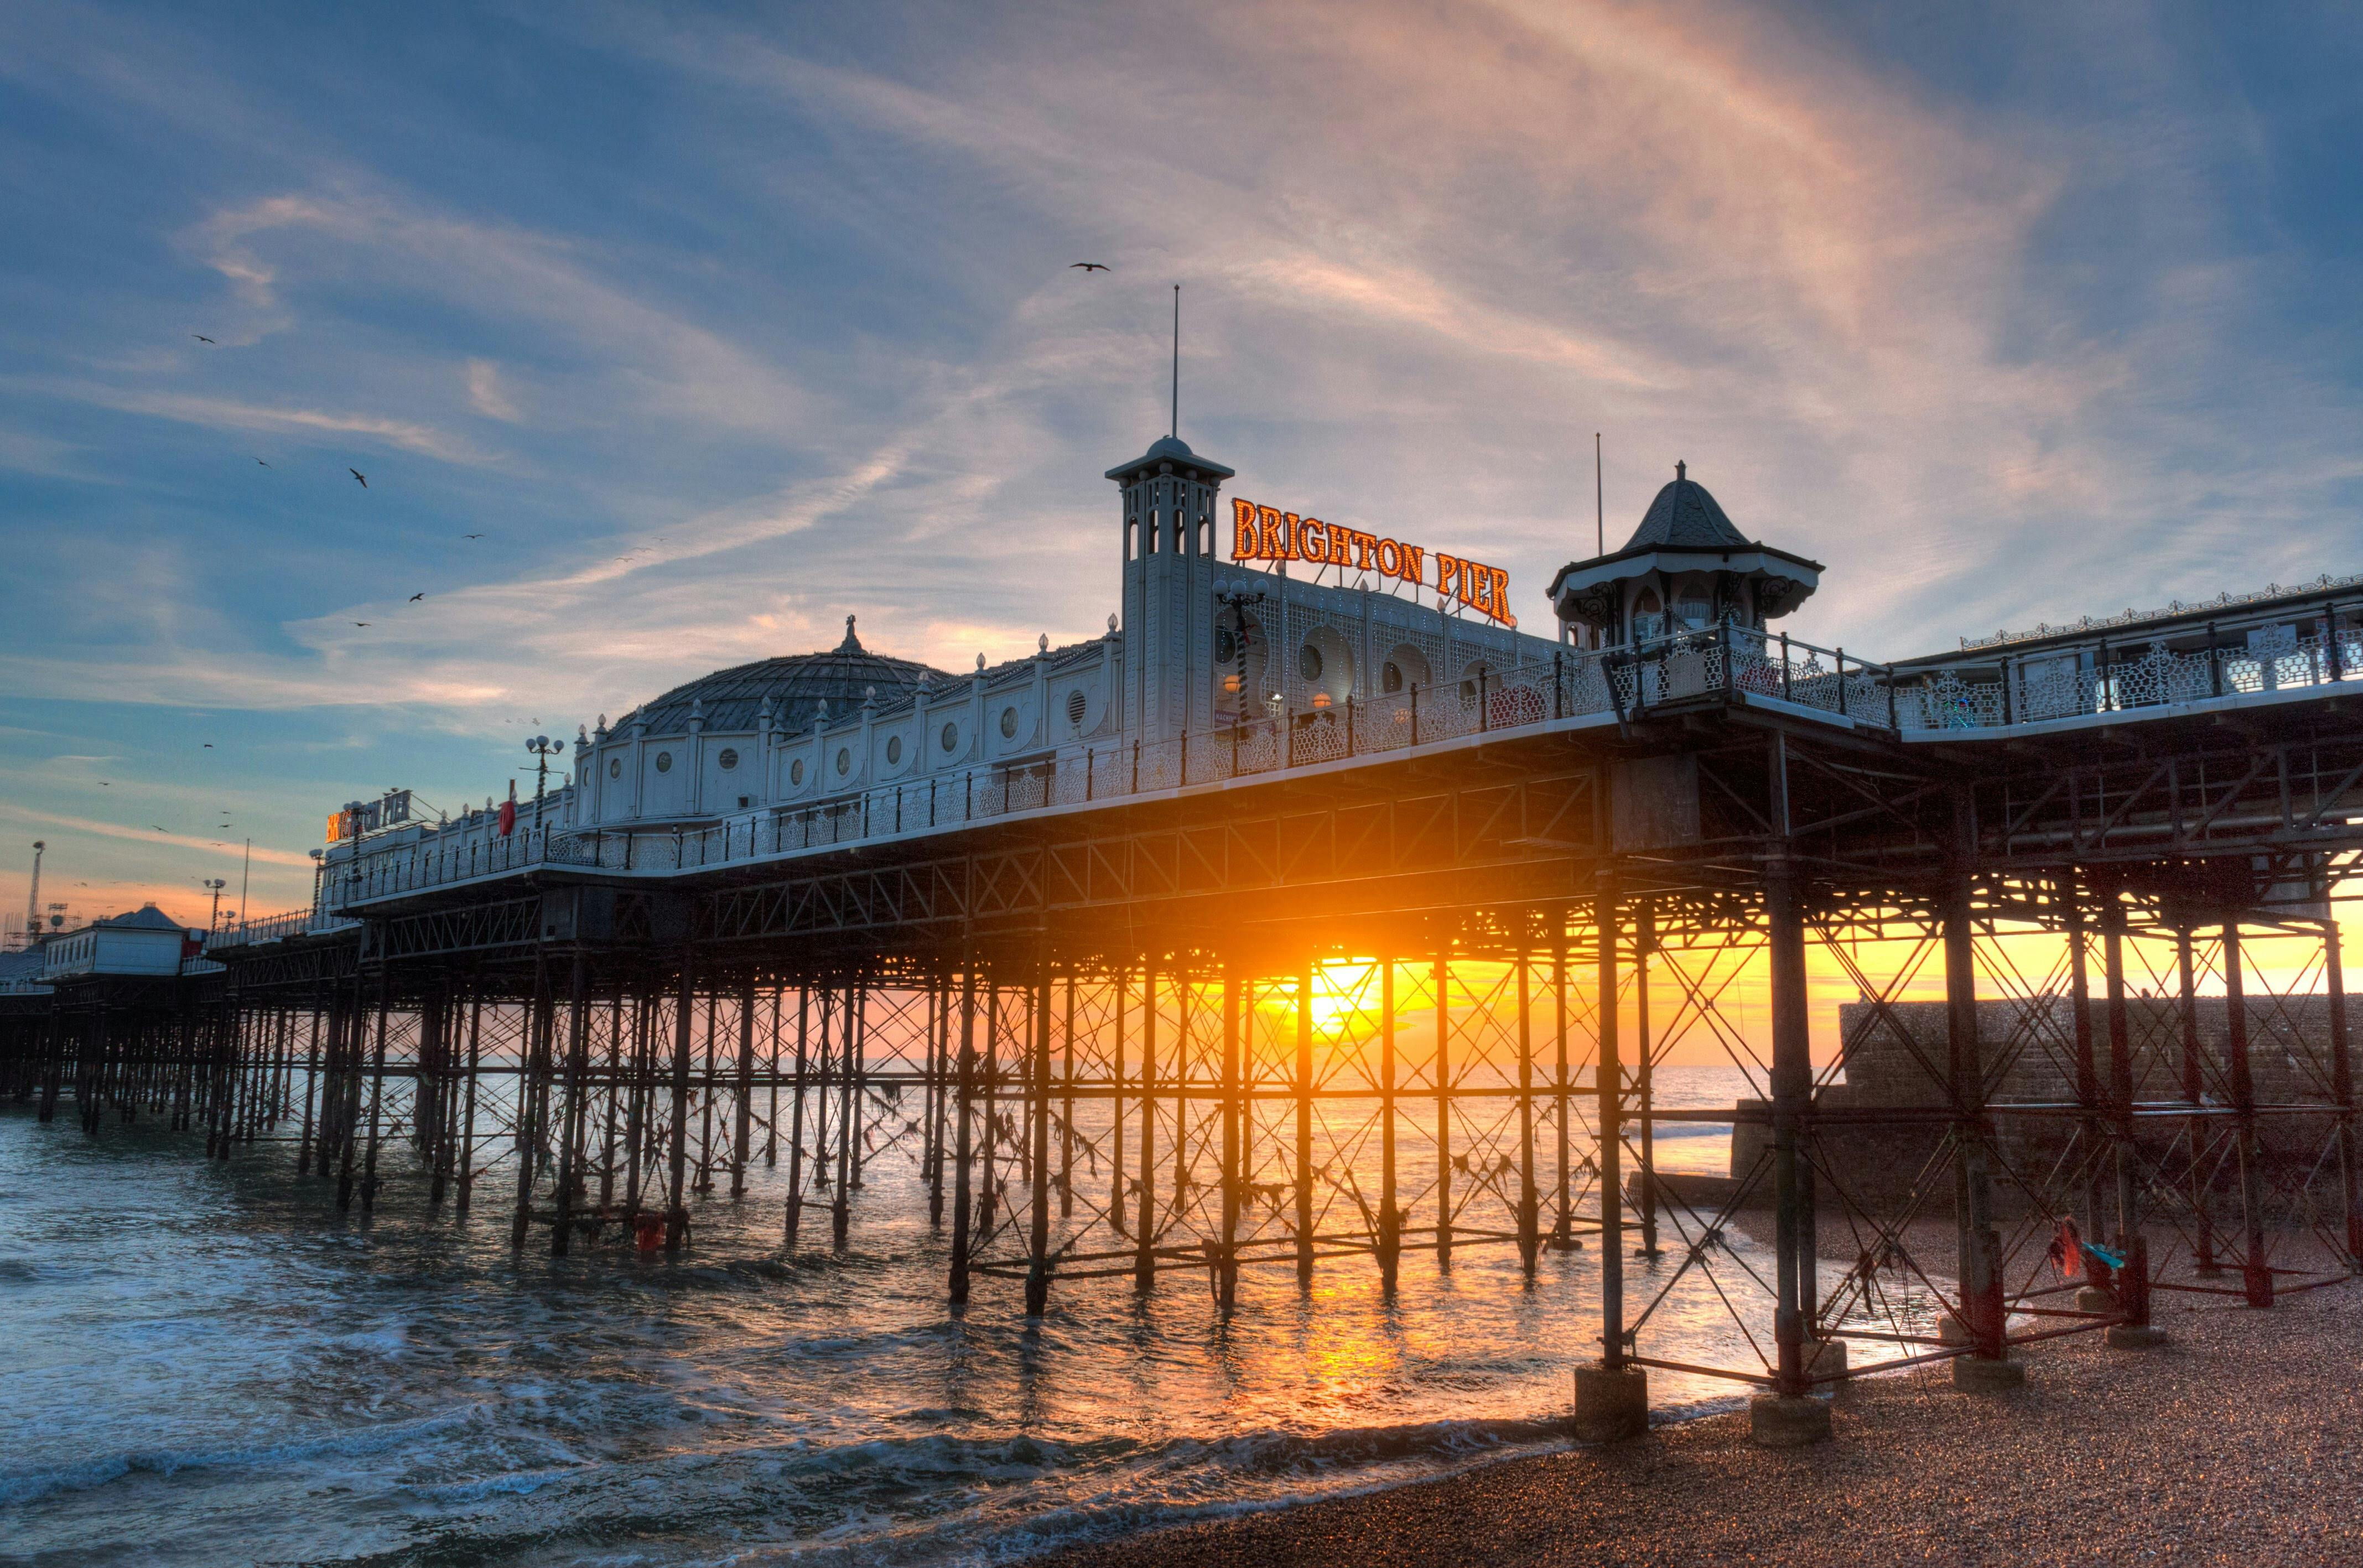 Brighton Pier at low tide with a sunset as backdrop